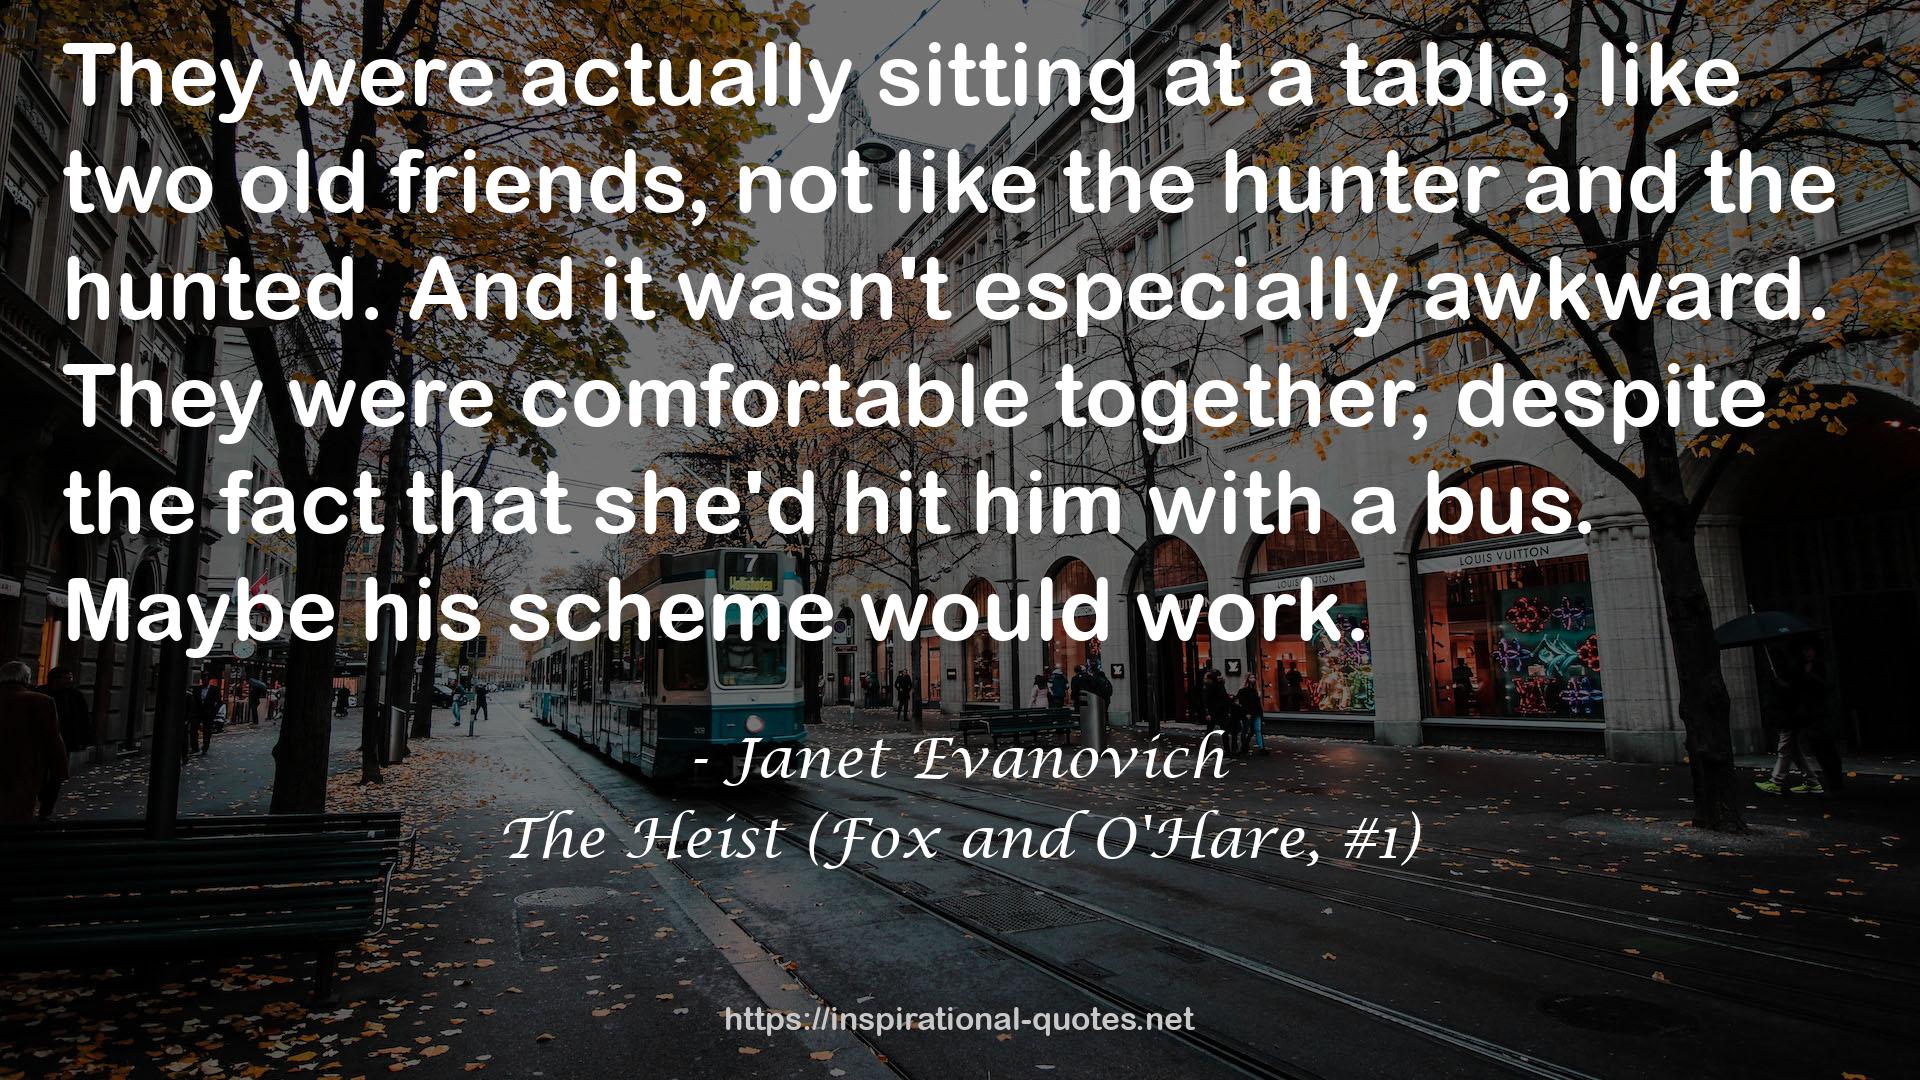 The Heist (Fox and O'Hare, #1) QUOTES